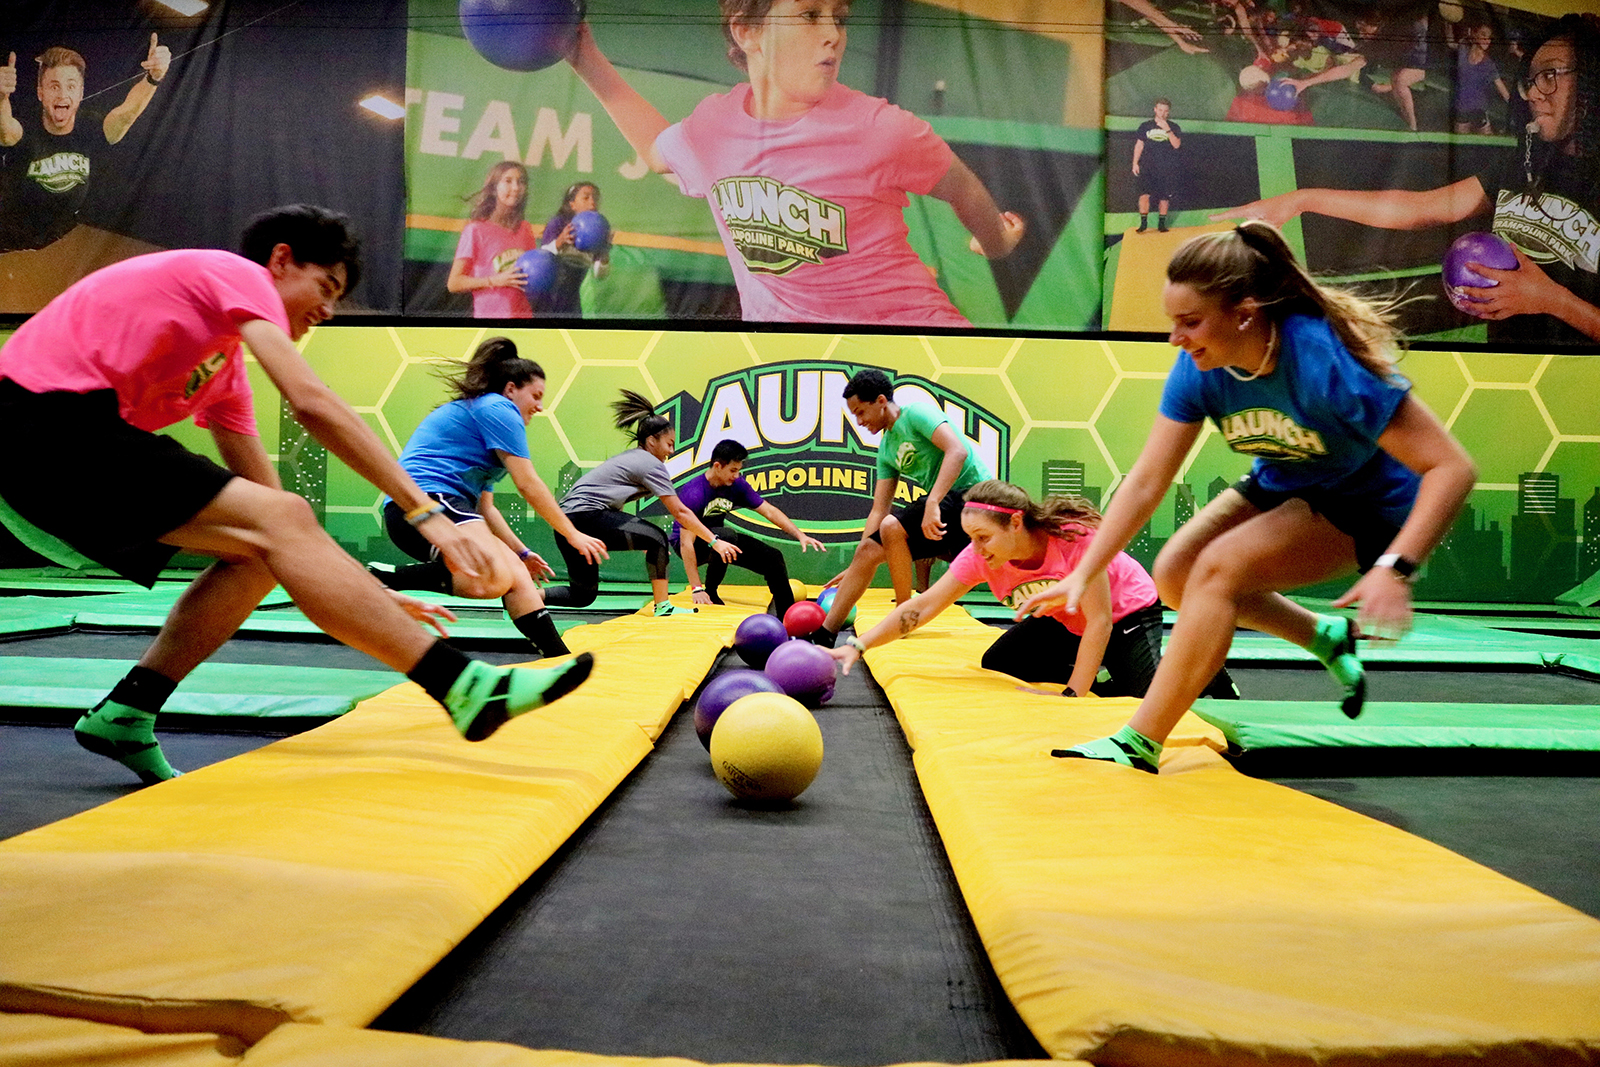 Launch Trampoline Park Norwood, MA | Contact